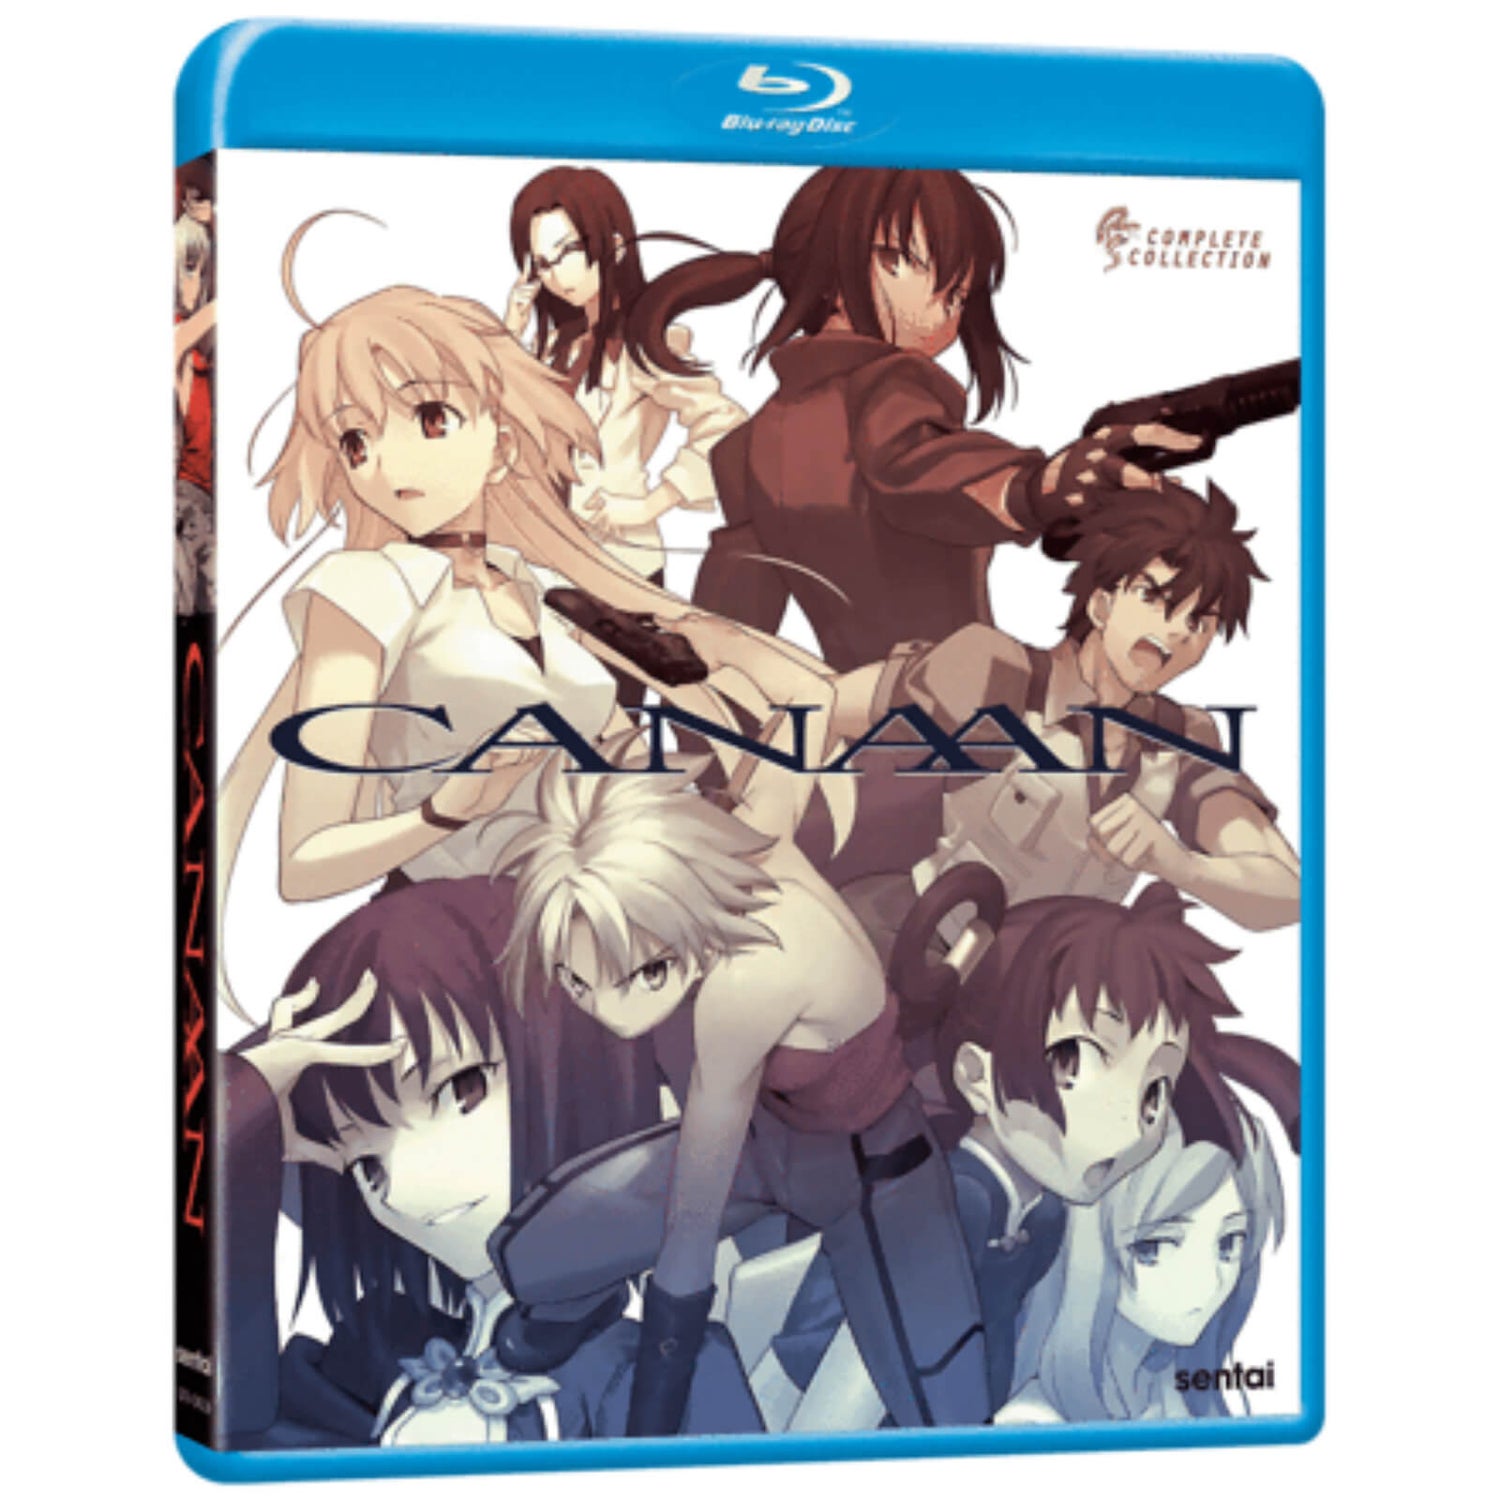 Canaan: Complete Collection (US Import)